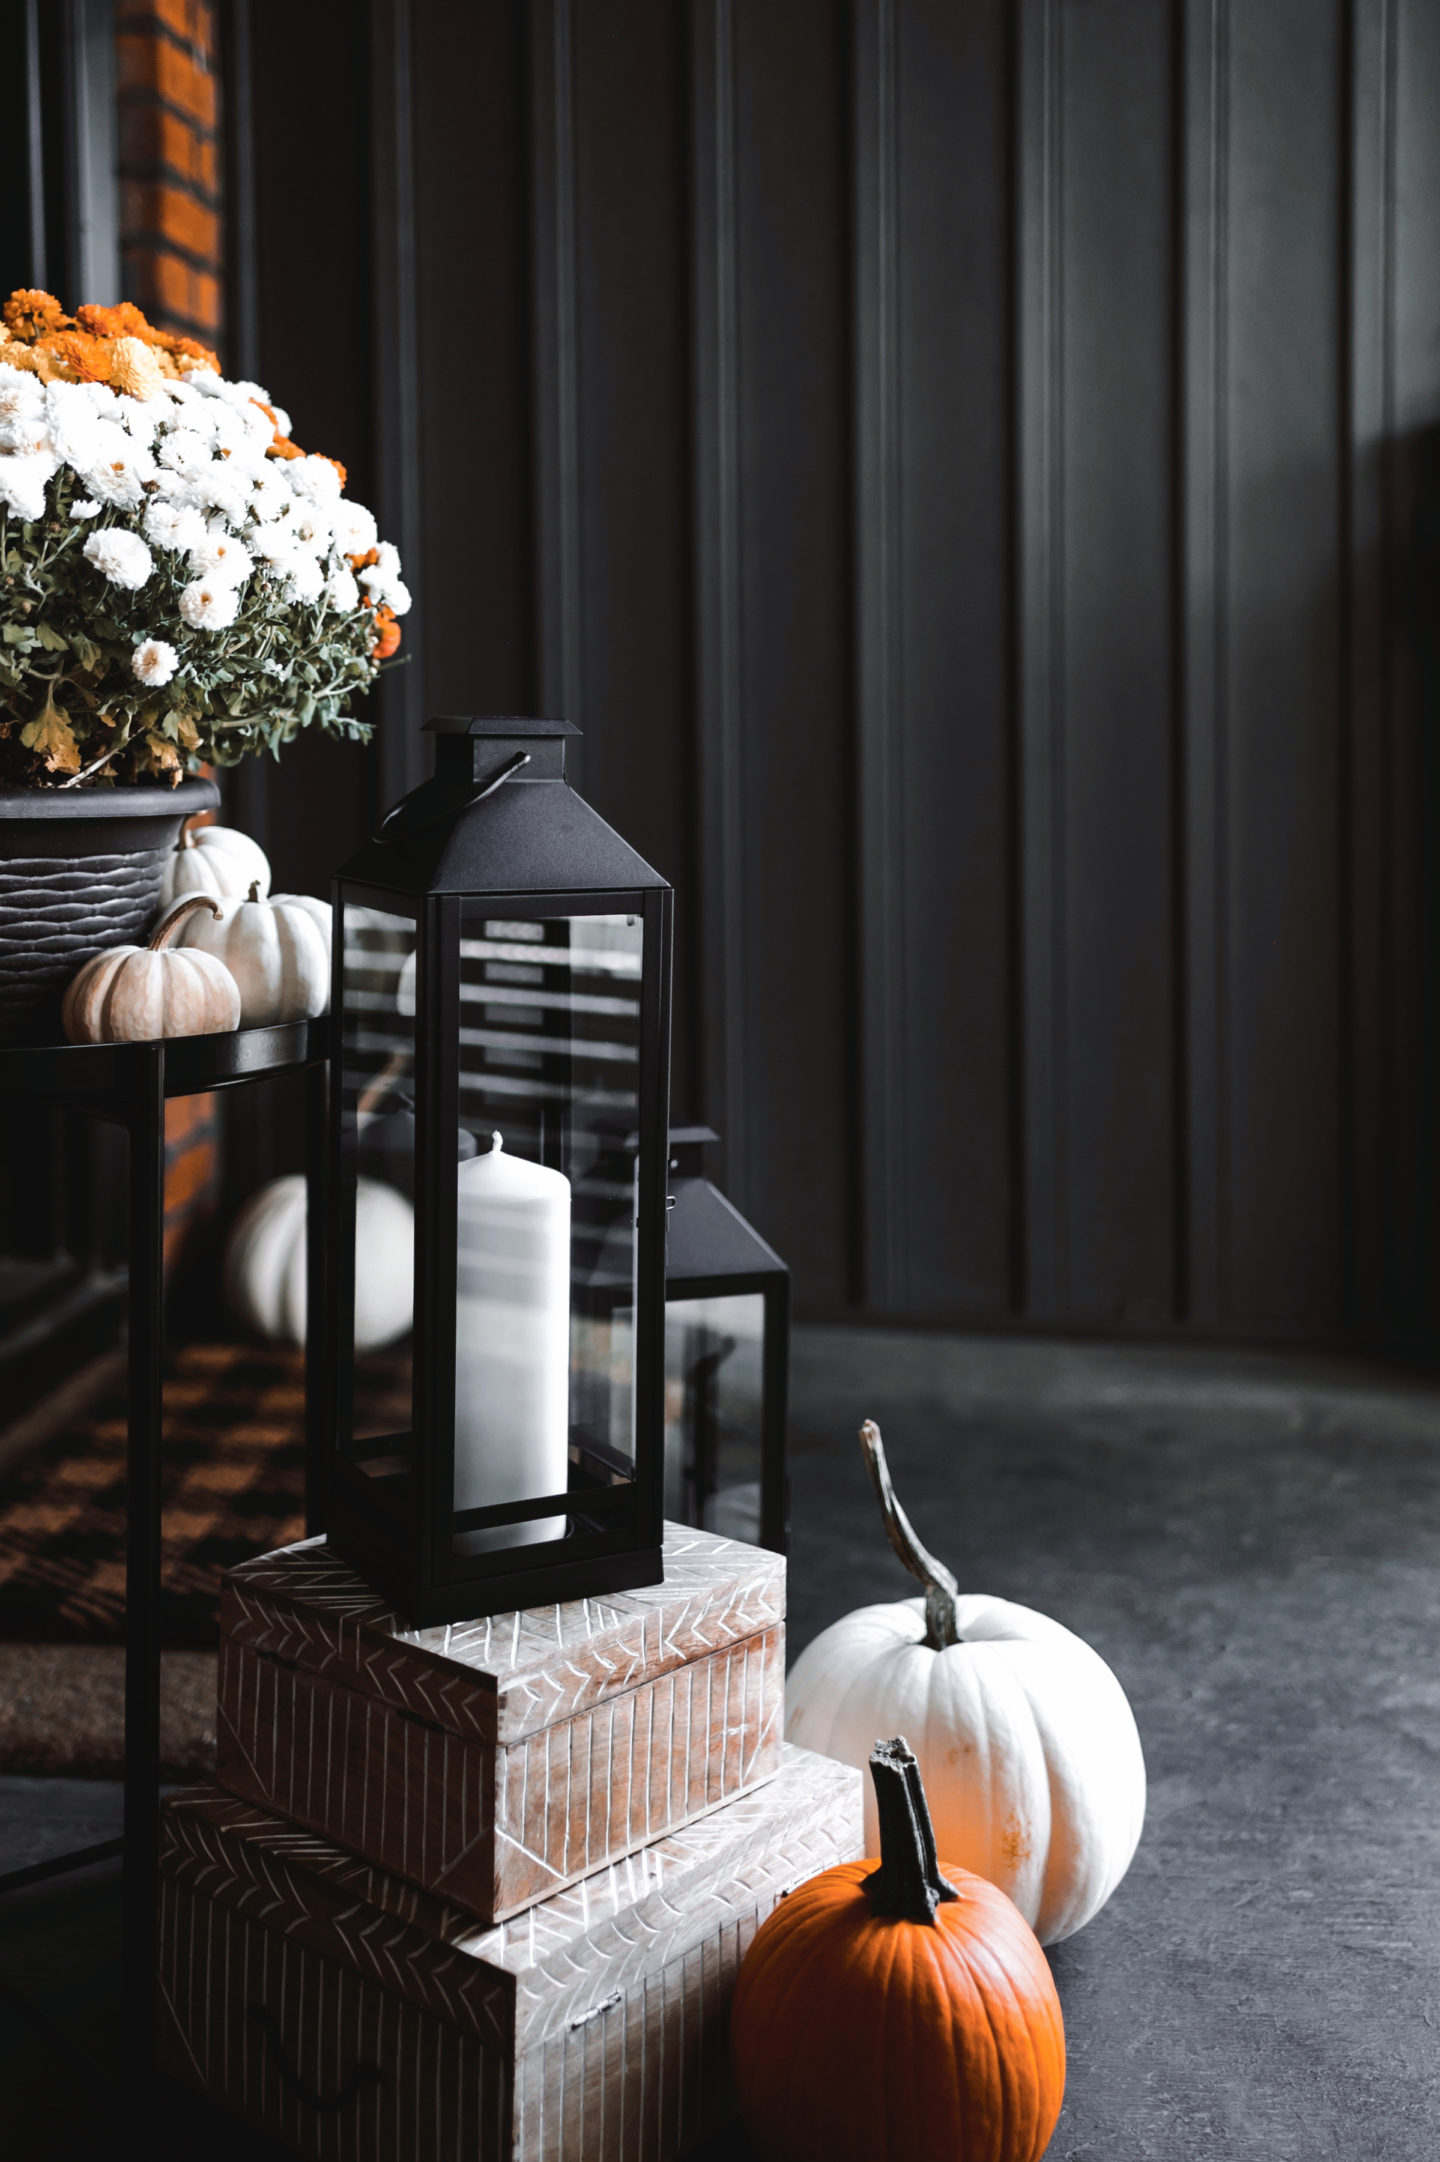 Fall decor scene with pumpkins, flowers, and candles